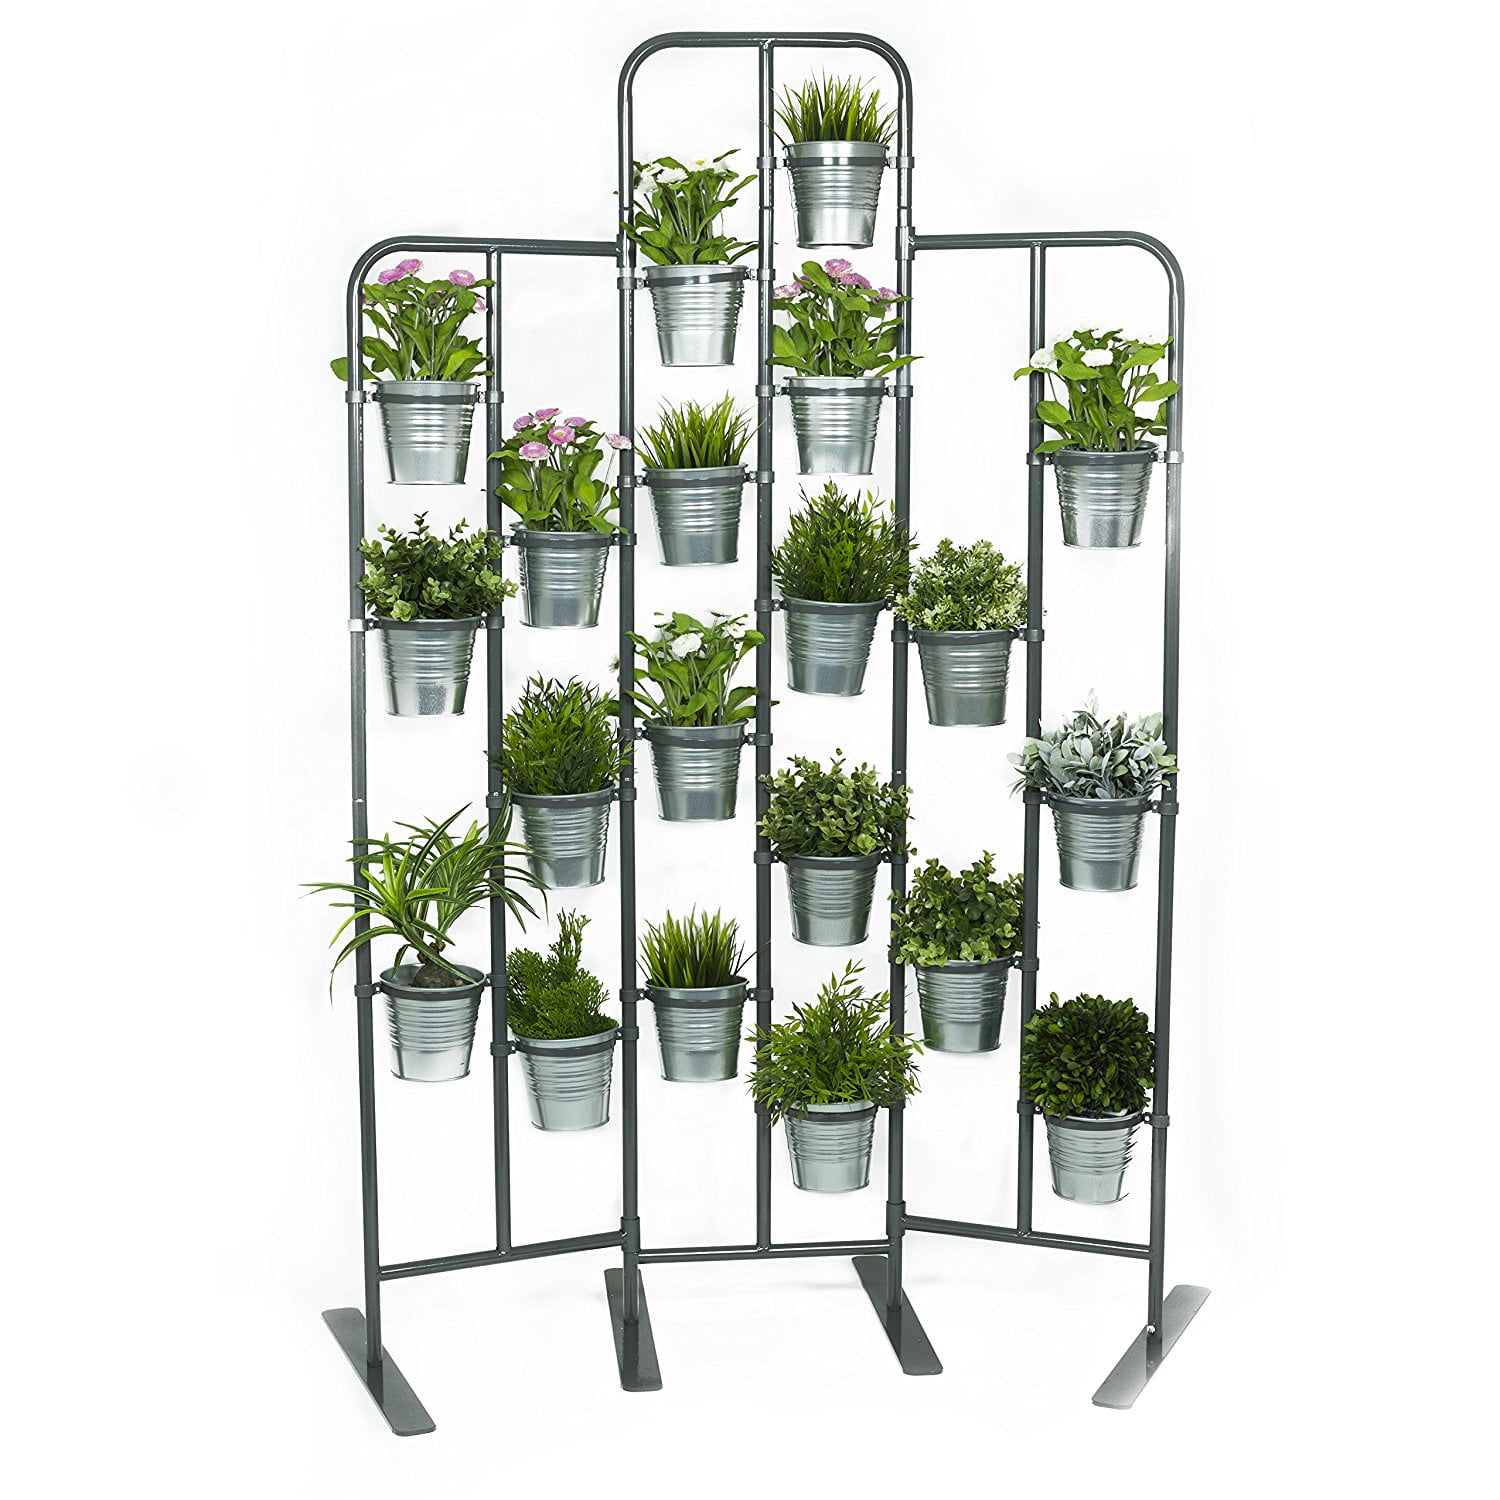 Ruddings Wood Classic Metal Pot Plant Stand Shelf Garden Outdoor Tall Patio Potted Flower Display Holder Rack